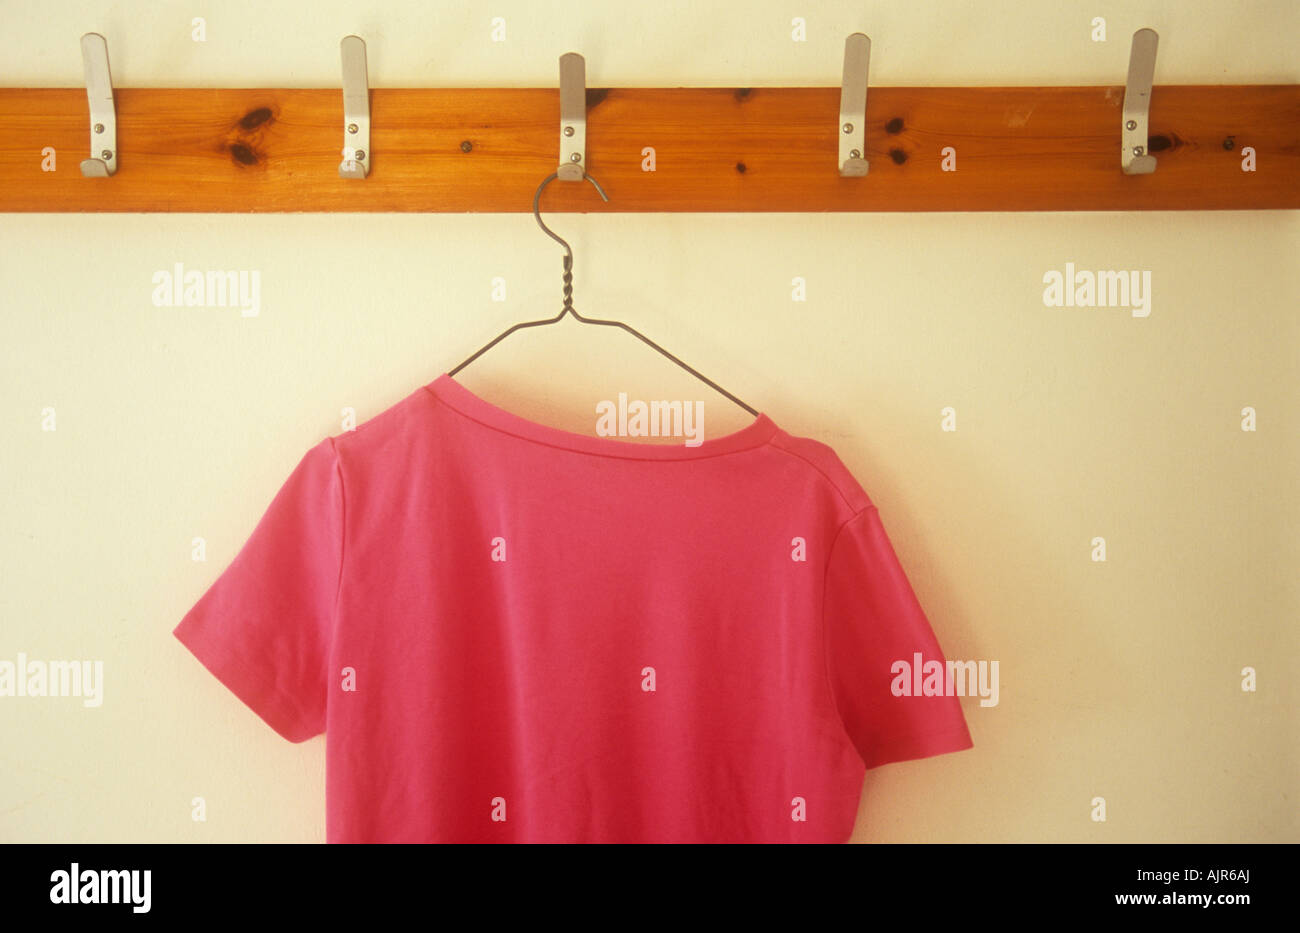 https://c8.alamy.com/comp/AJR6AJ/pink-t-shirt-on-wire-hanger-hanging-from-metal-hook-in-row-of-clothes-AJR6AJ.jpg